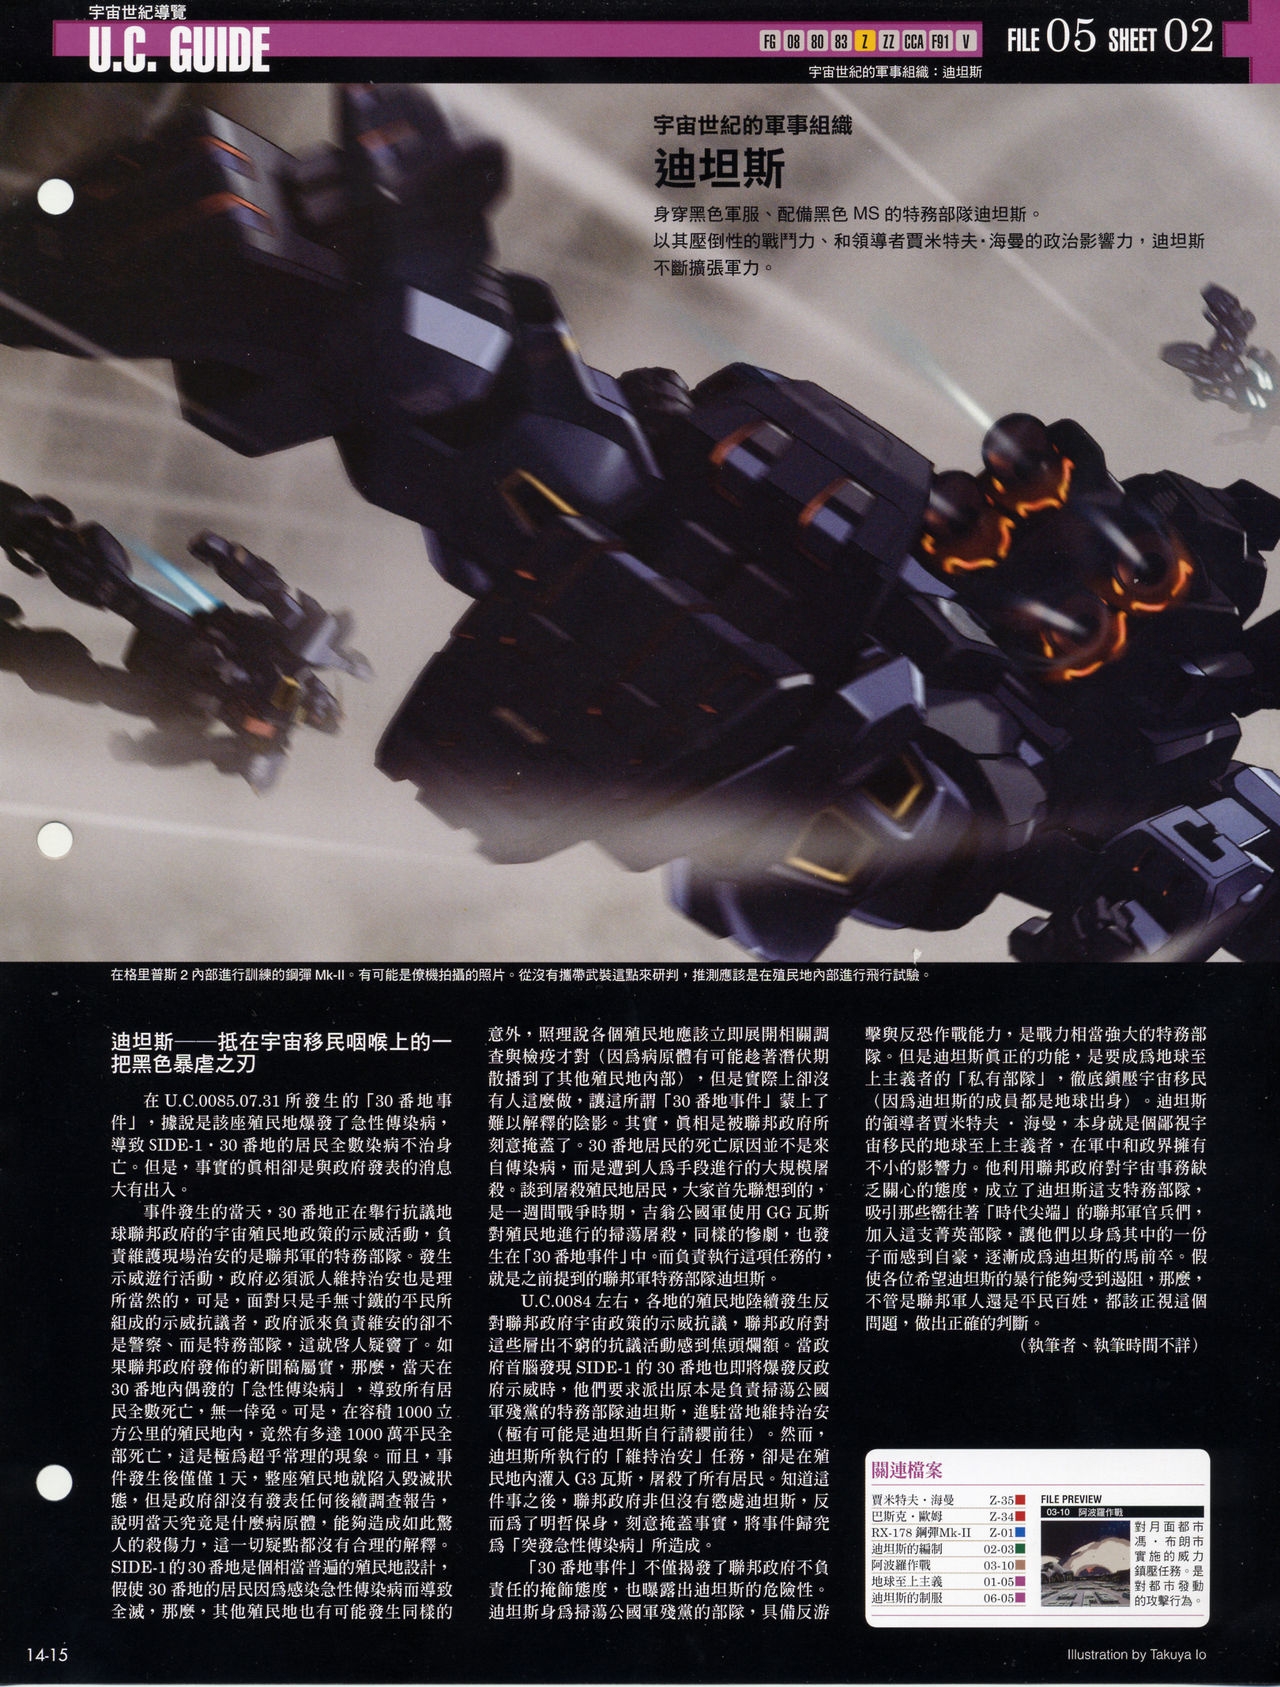 The Official Gundam Fact File - 014 [Chinese] 17